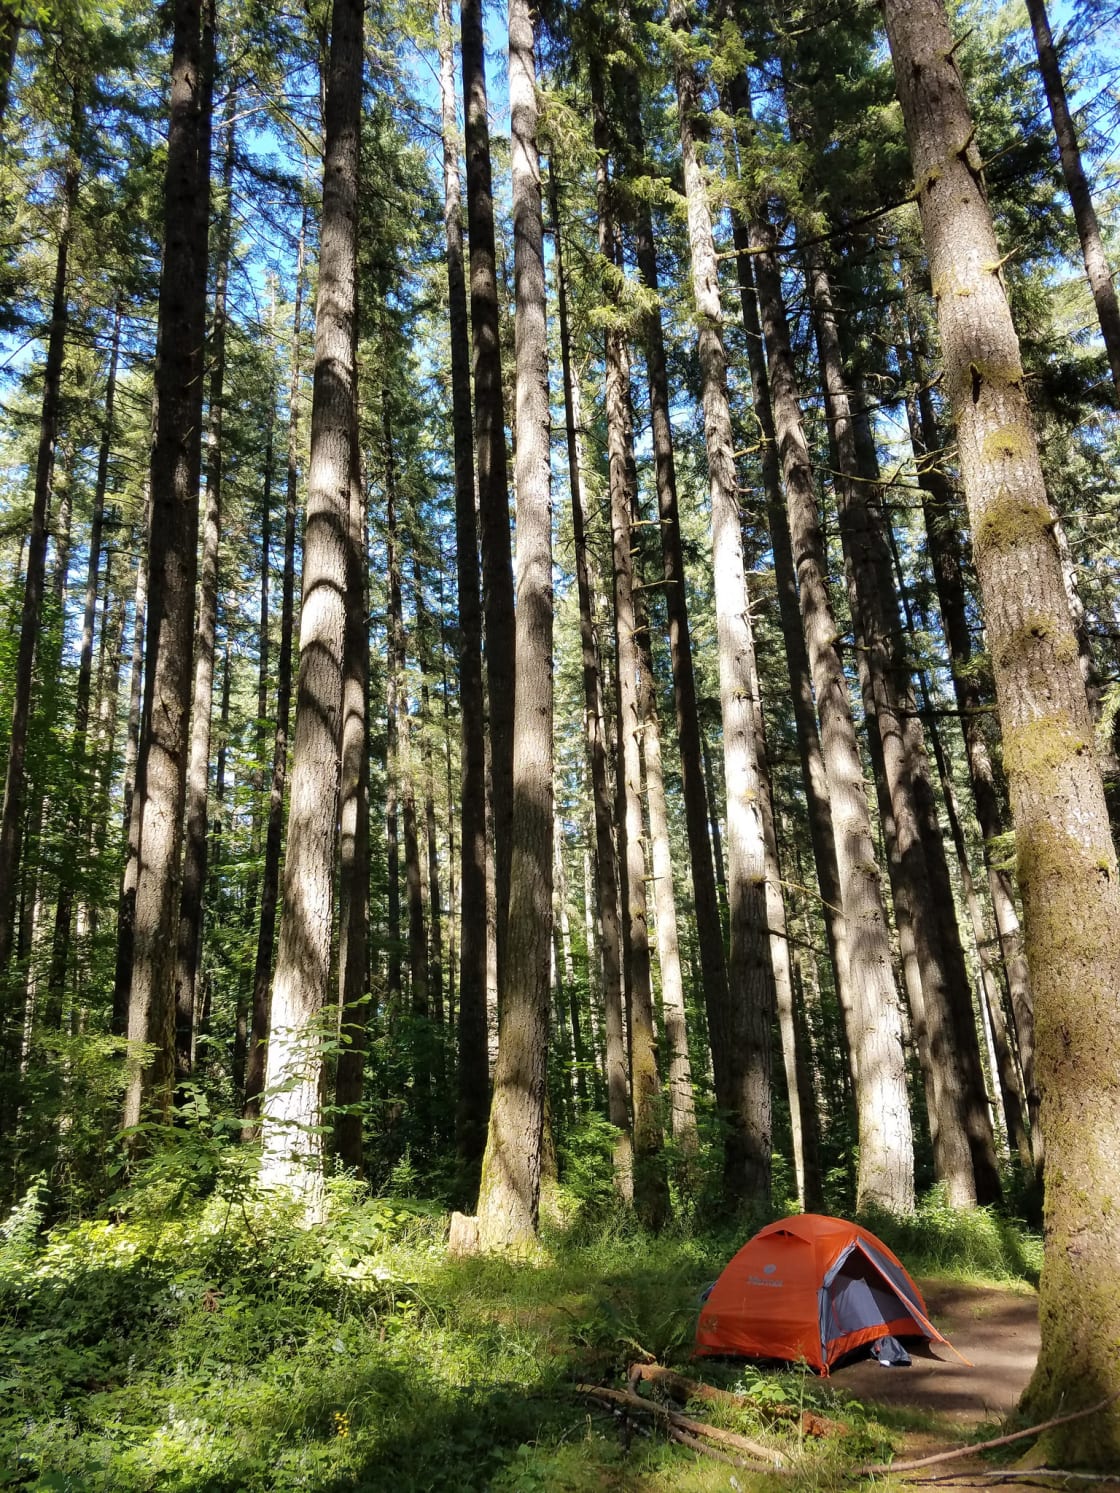 Trees surround my tent at one of the campsites.